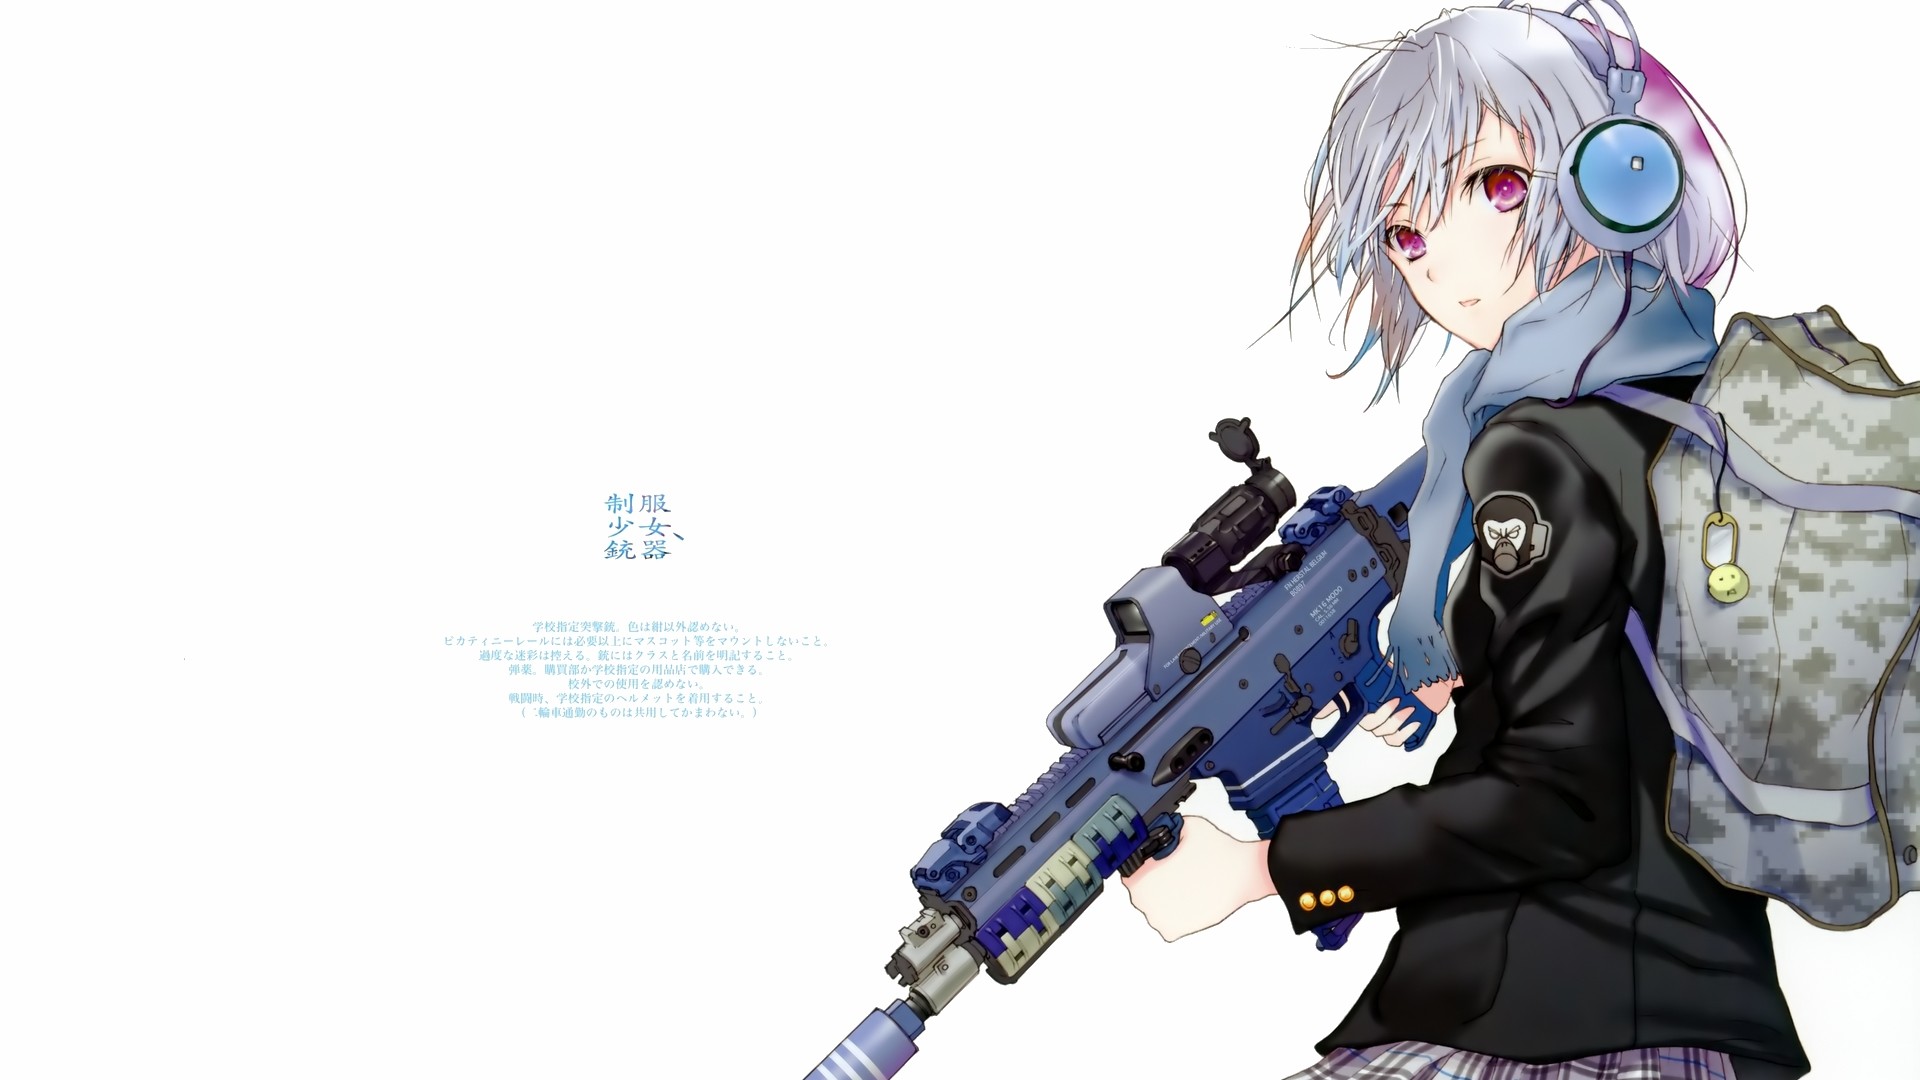 Cant wait to finish my AR project  Anime Girls with Guns  Facebook